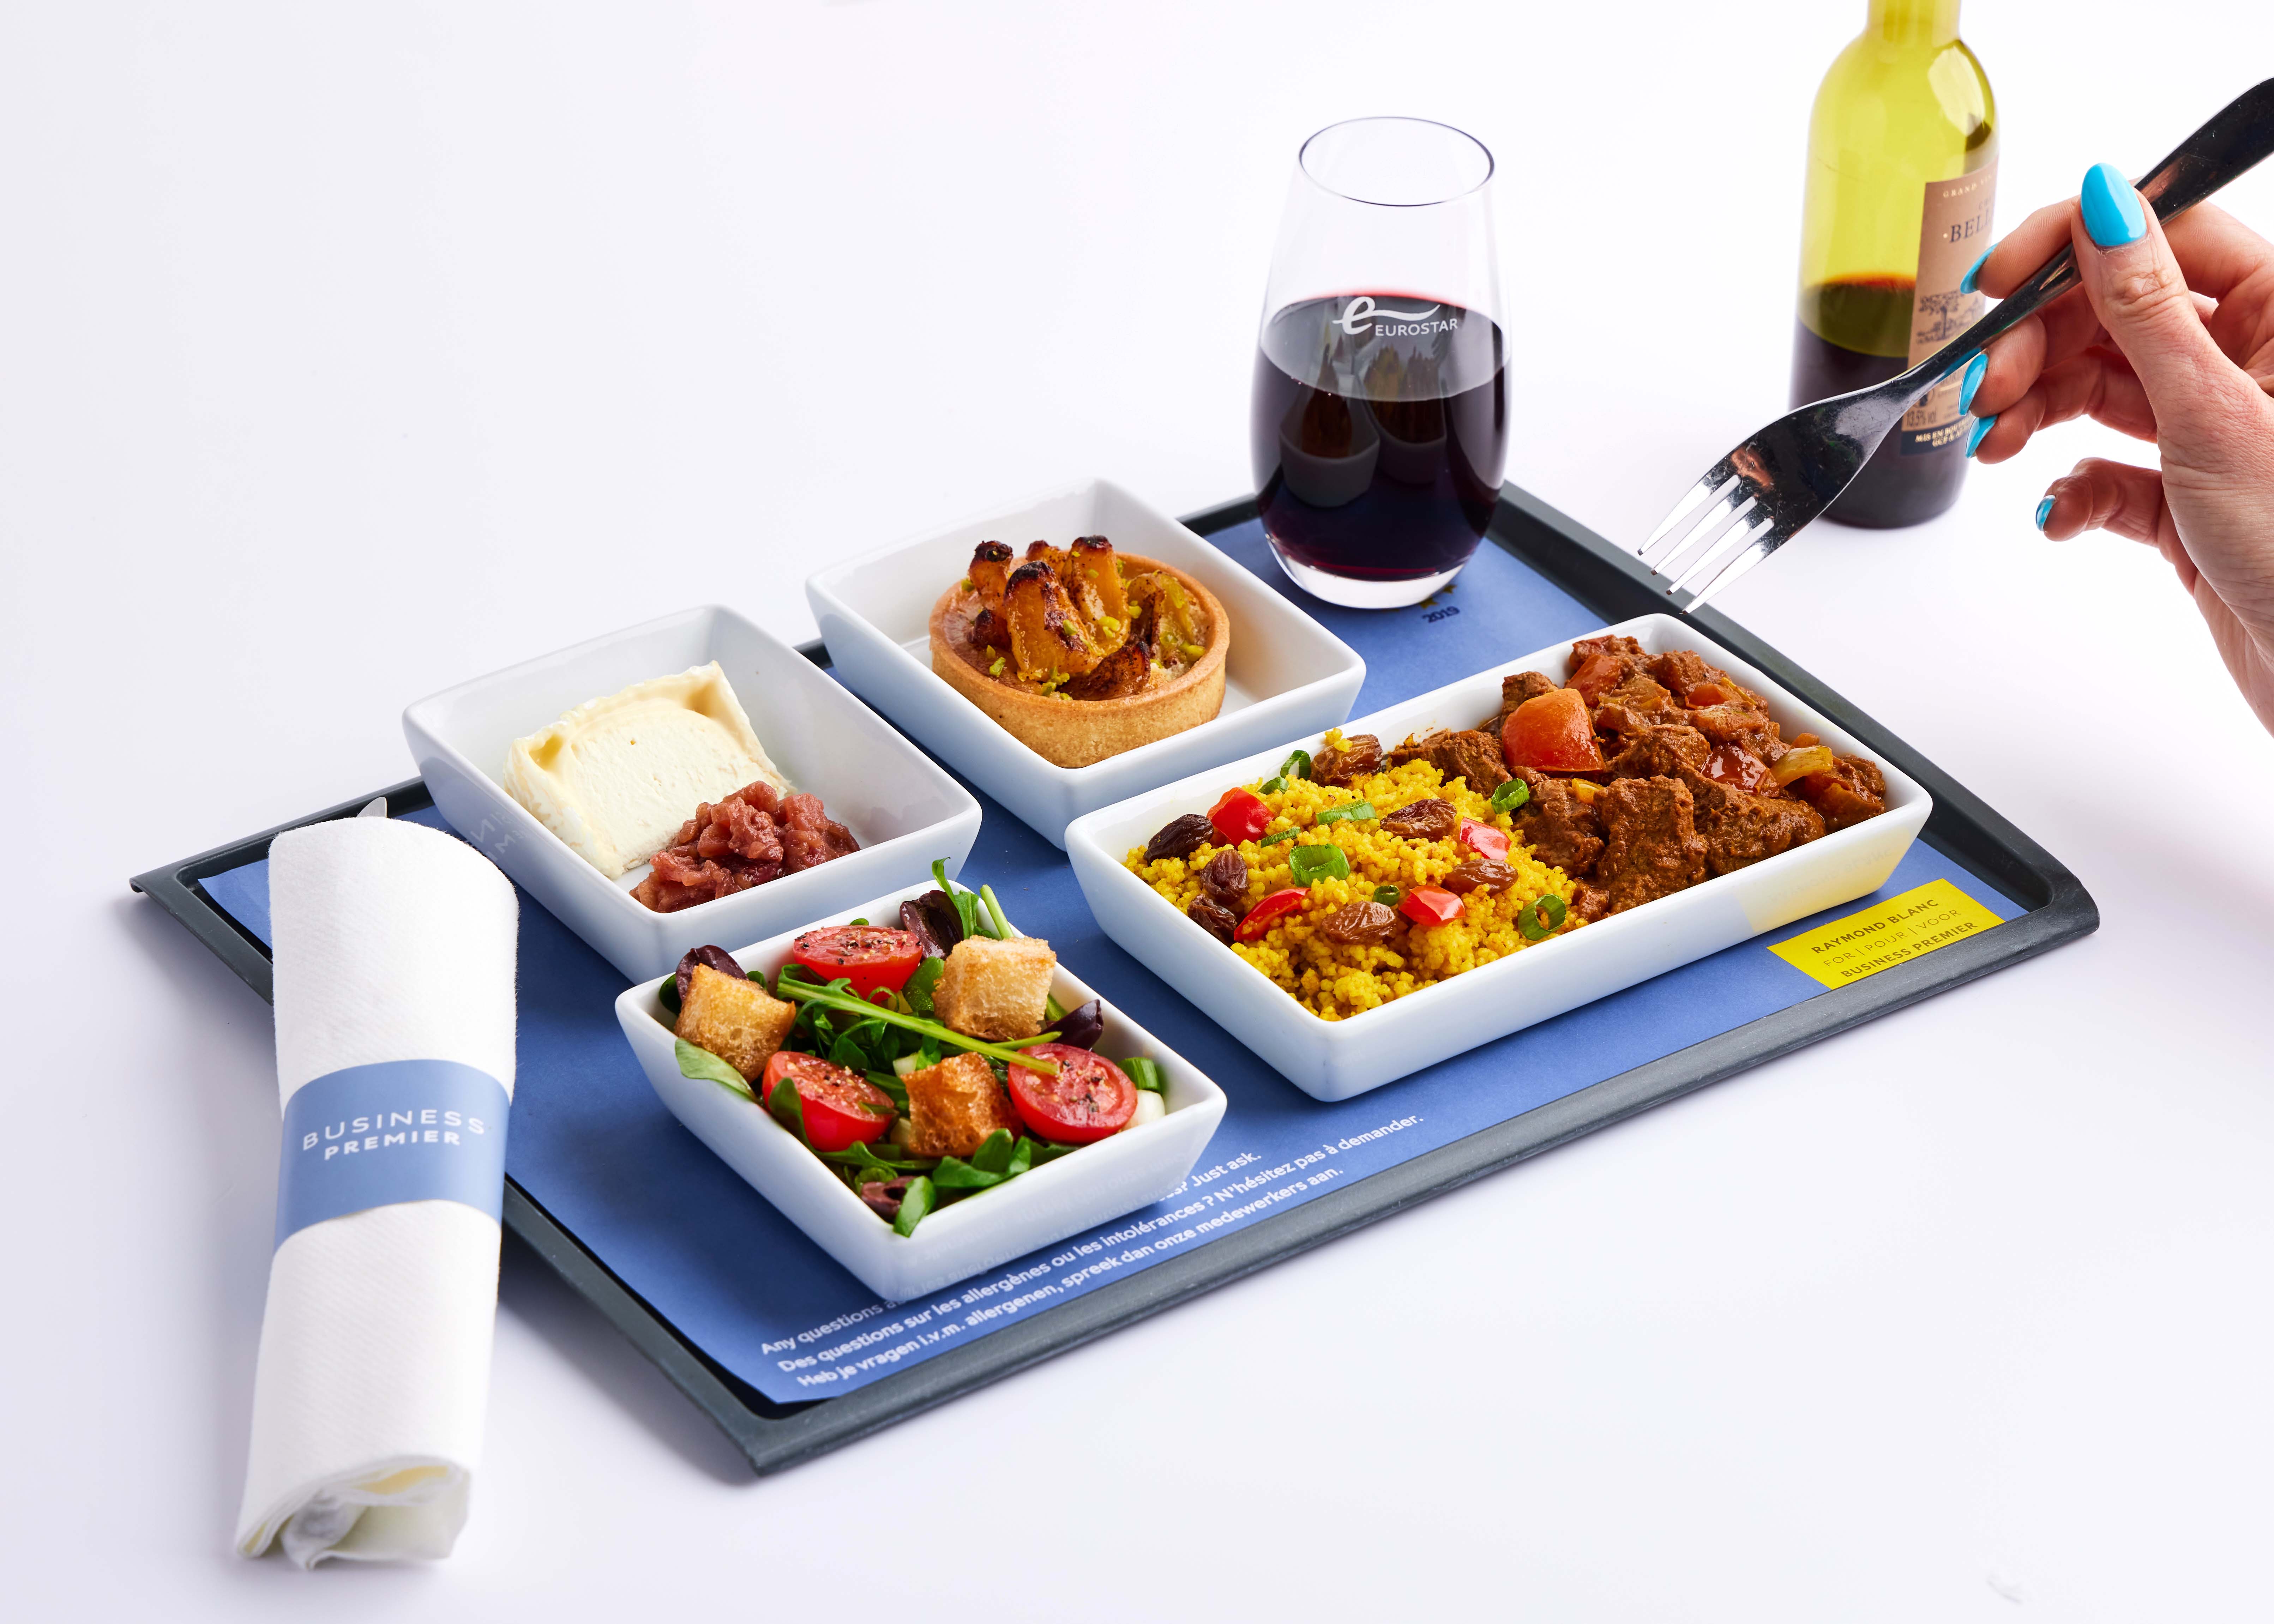 Eurostar changes its menu weekly to reflect what’s in season